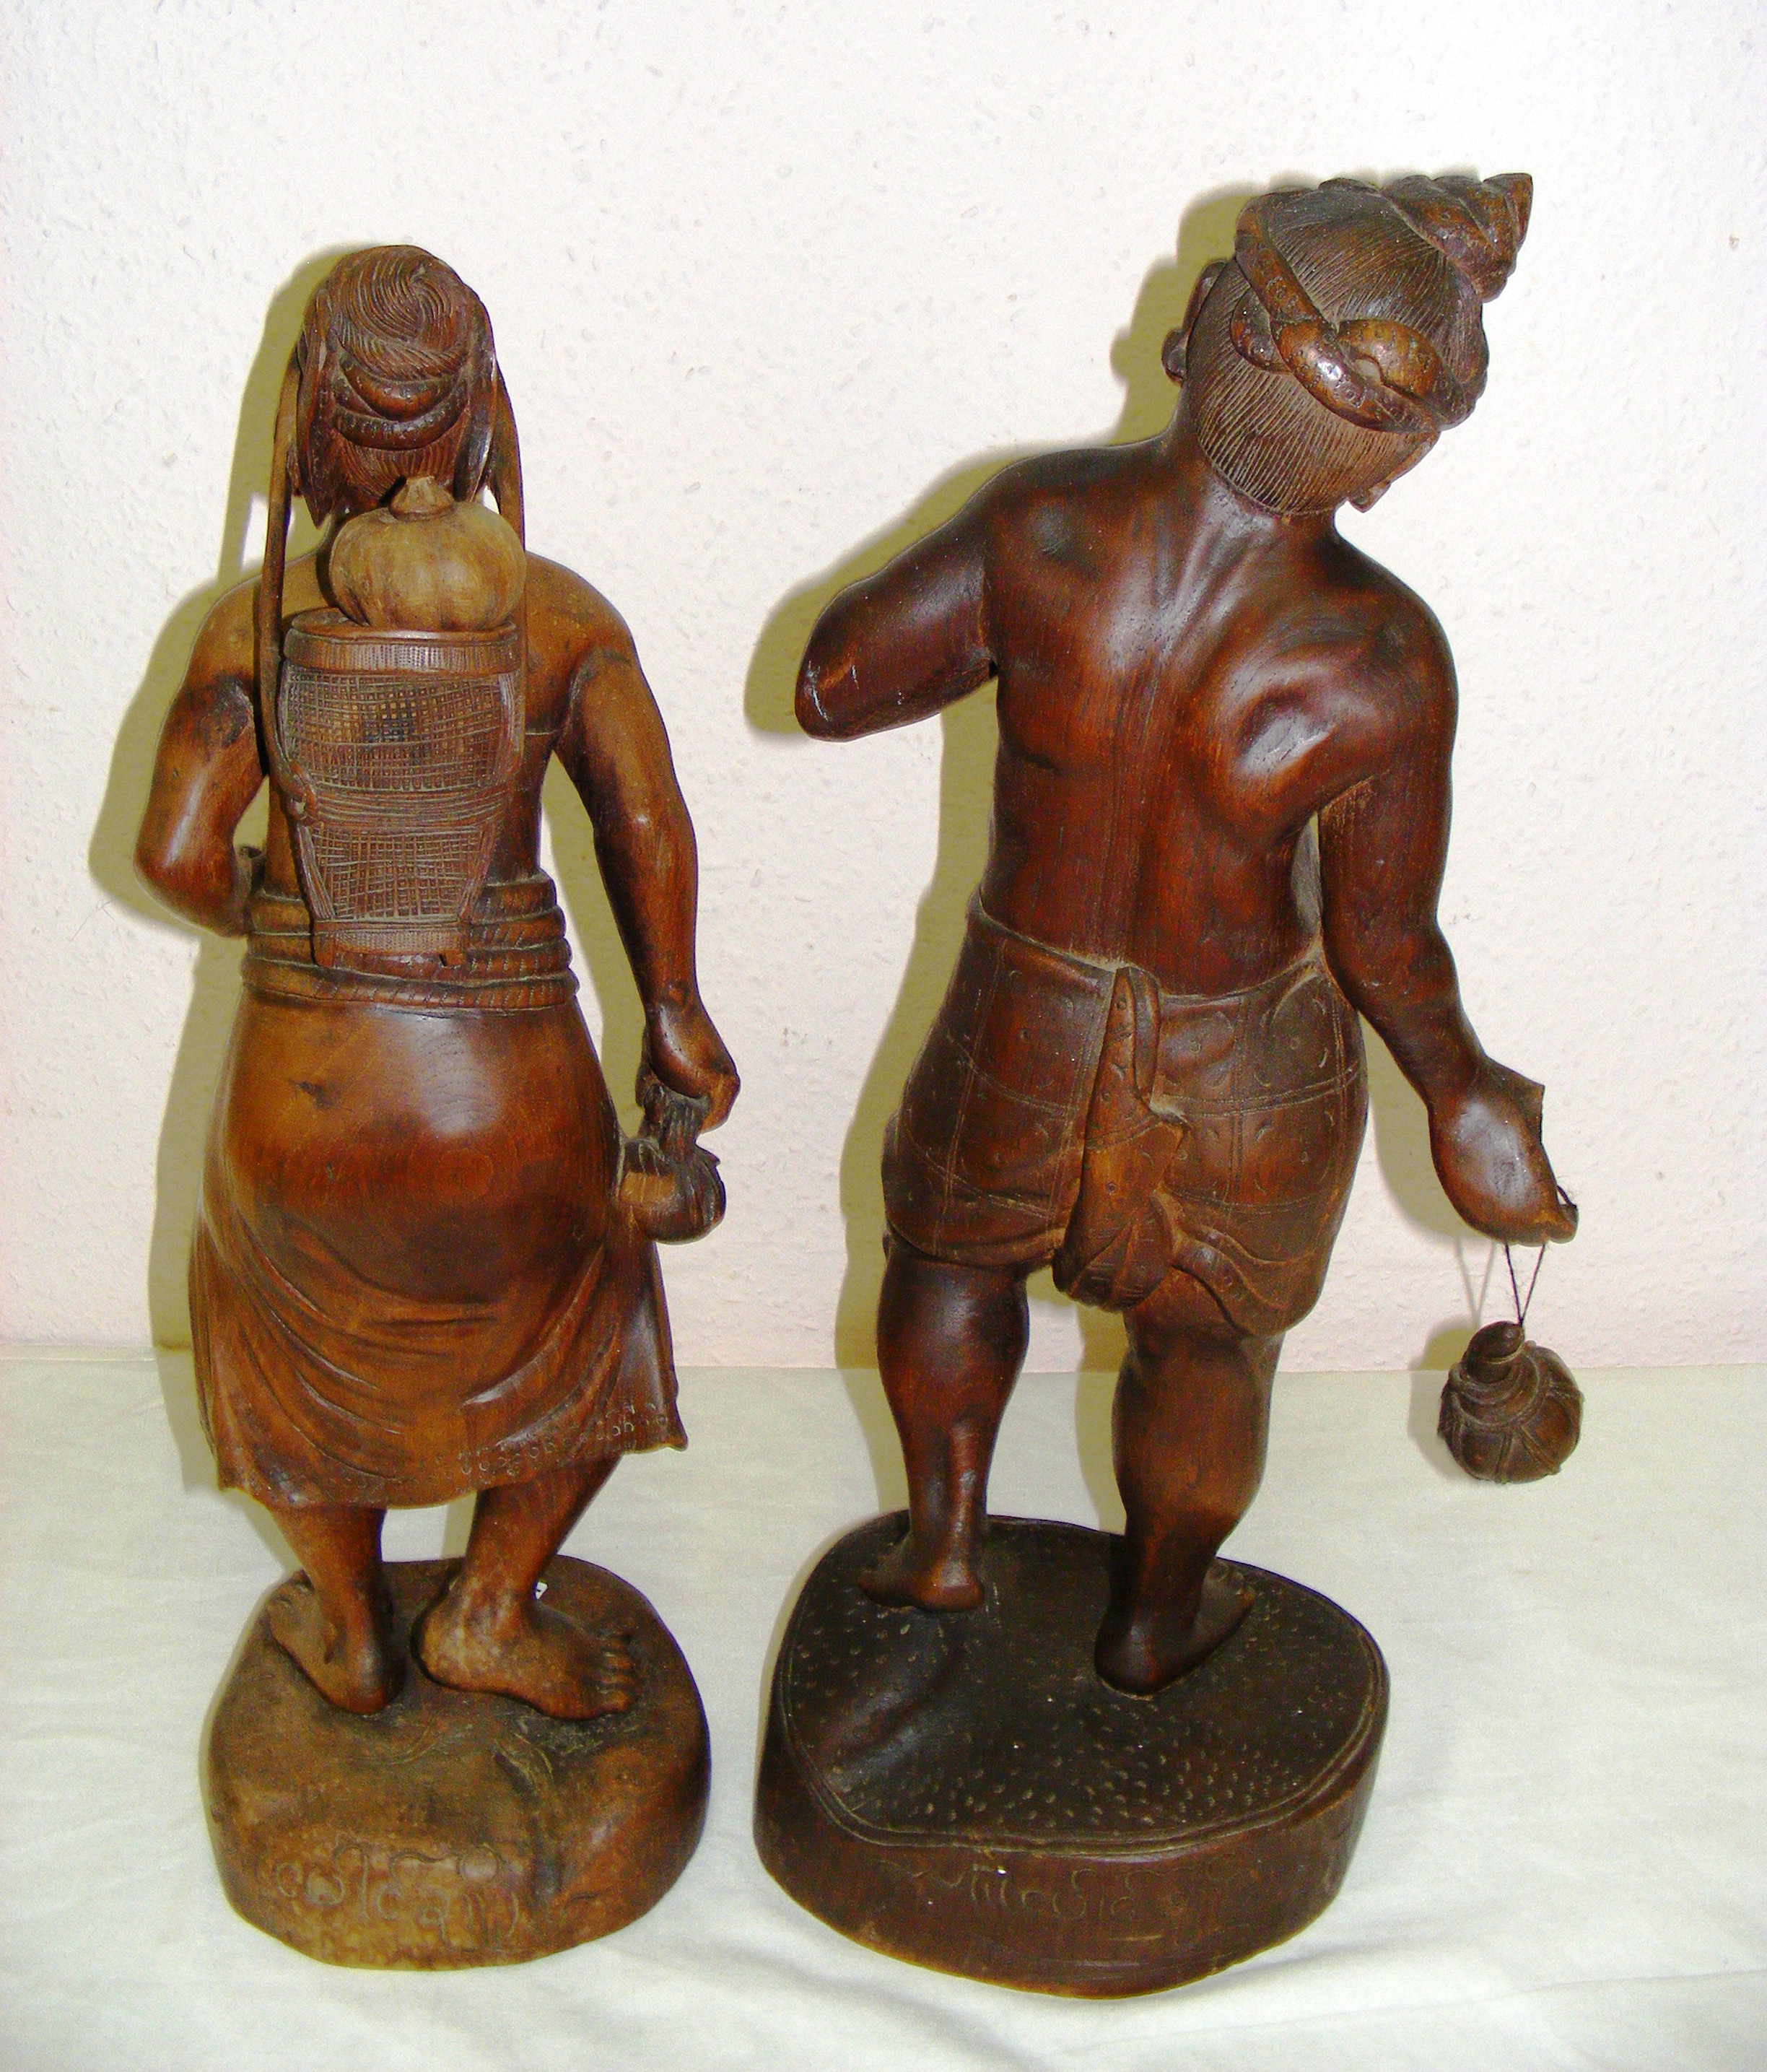 A pair of Indian carved hardwood figures of a man and woman each measuring 23" tall. - Image 2 of 2